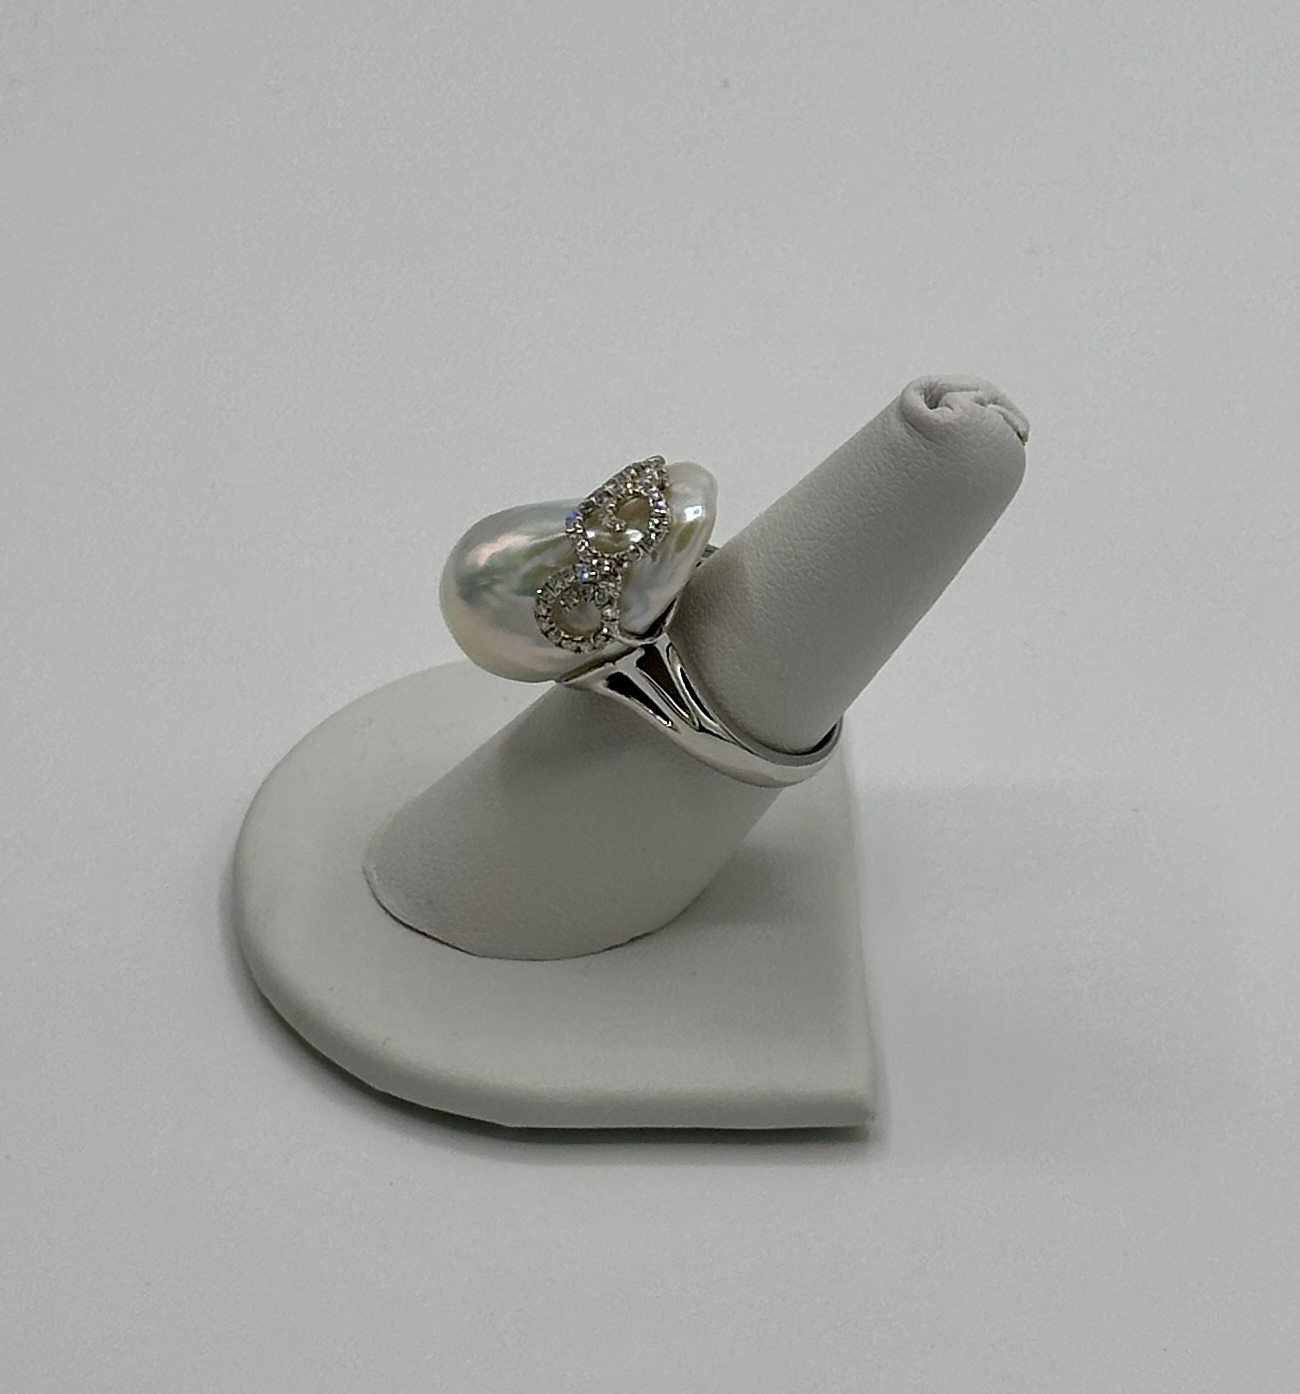 Extremely Baroque, High Luster, White Pearl Ring with Diamonds. 18 Karat White Gold